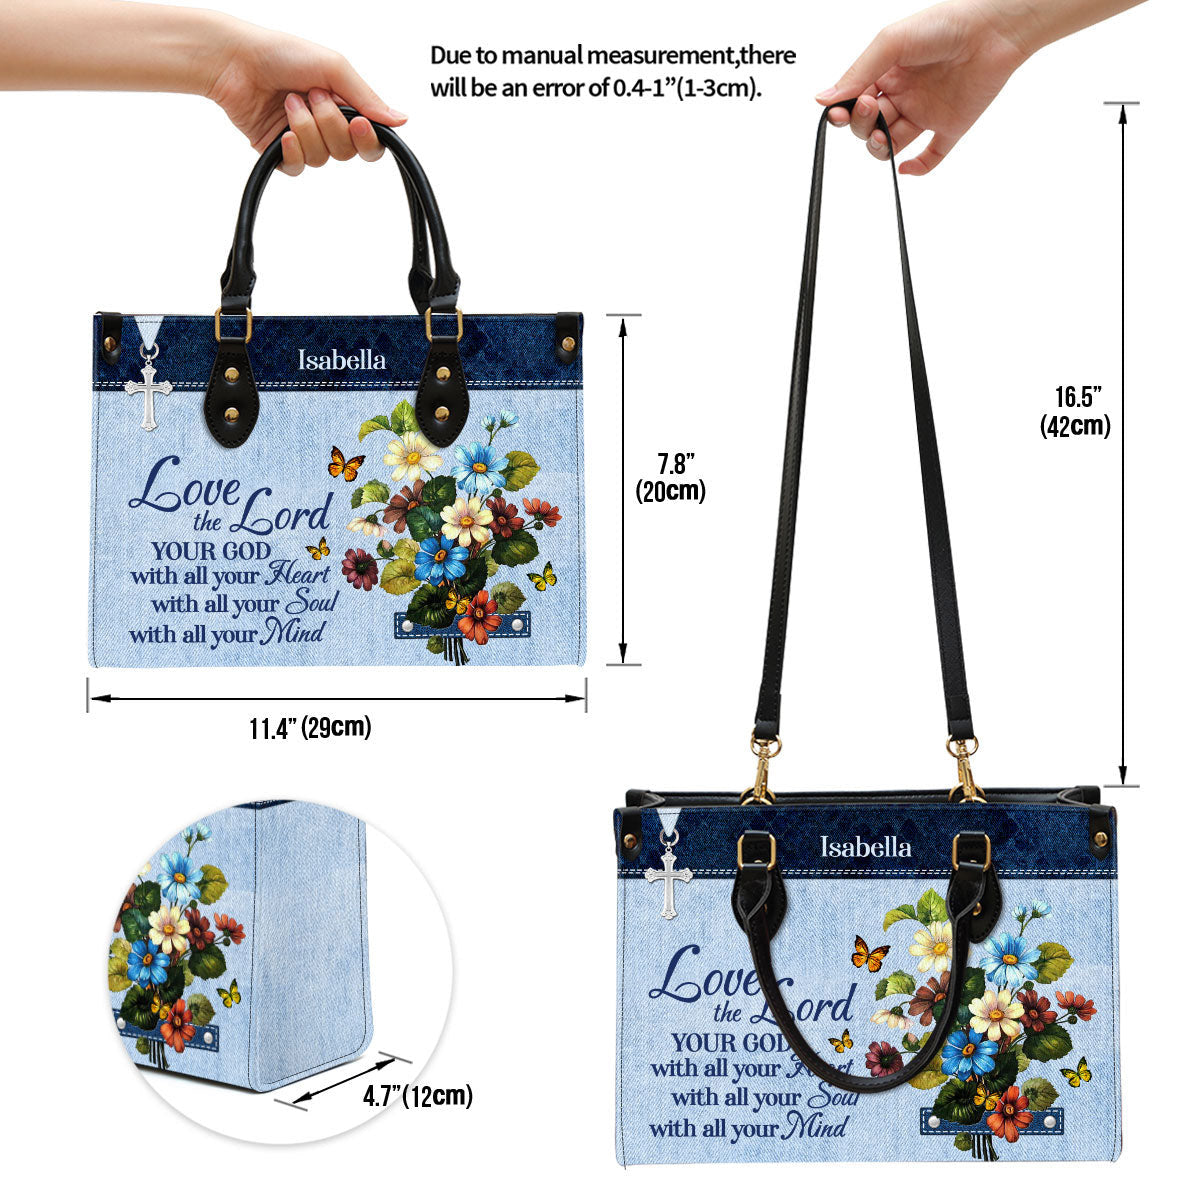 Matthew 2237 Personalized Flower Leather Handbag Love The Lord Your God With All Your Heart